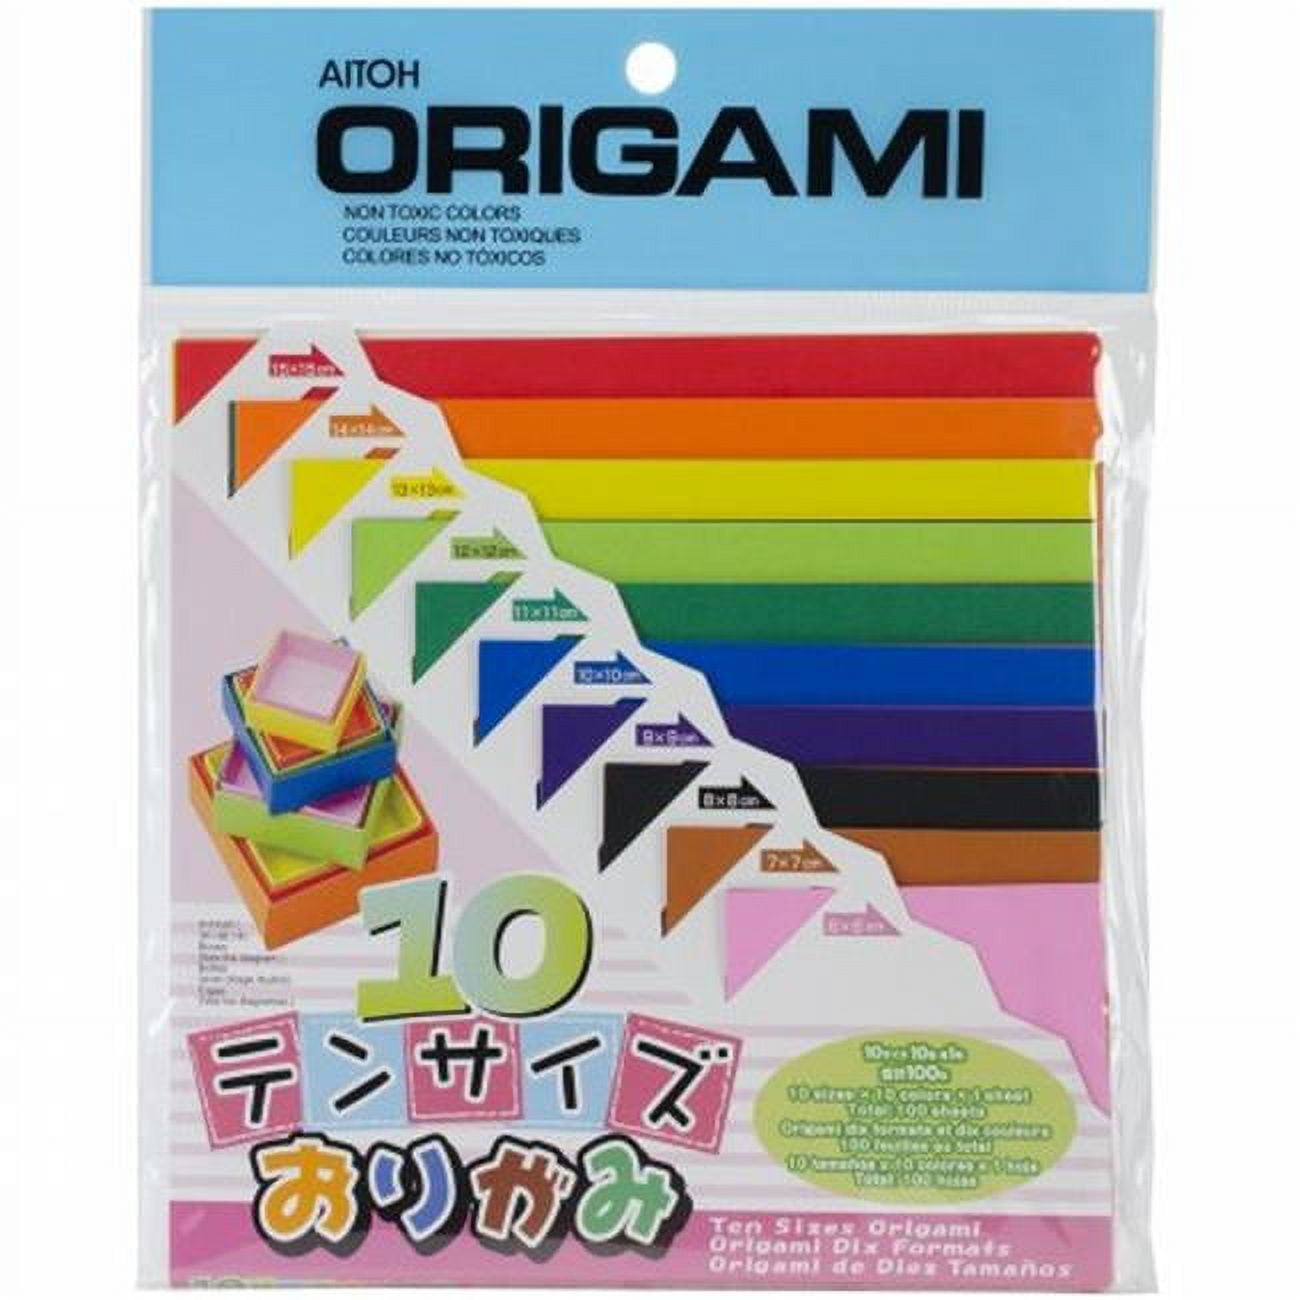 Aitoh Japanese Origami Paper x 3-inch 360 Sheets-Assorted Colors